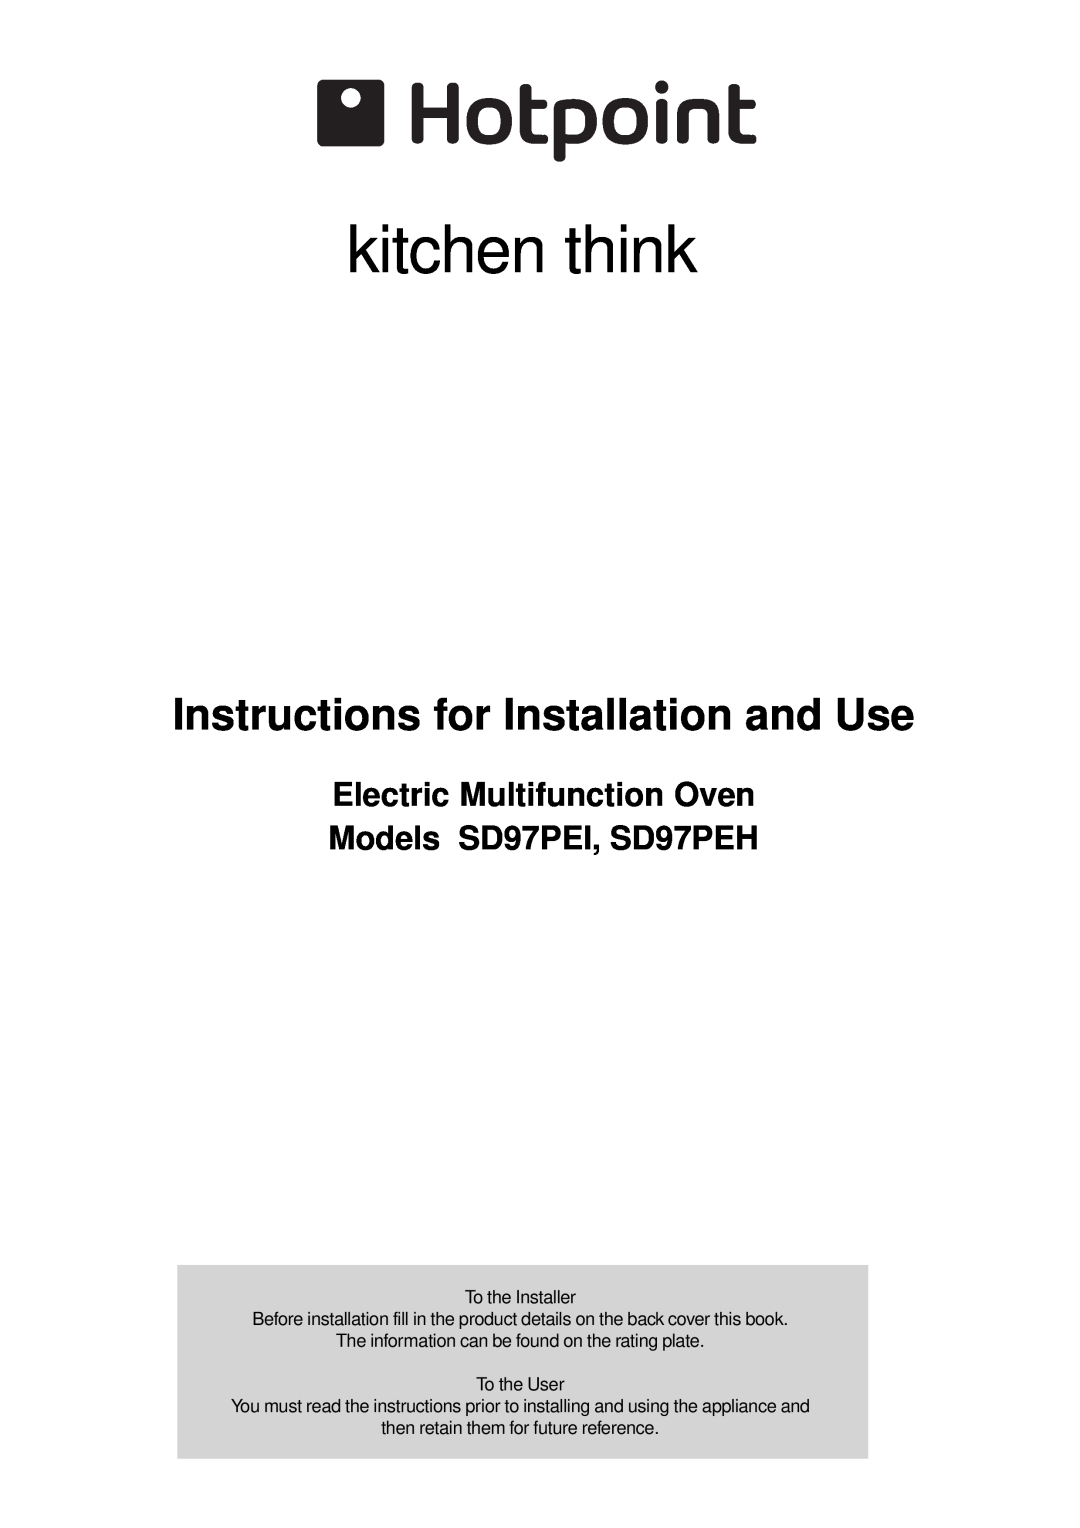 Hotpoint manual Instructions for Installation and Use, Electric Multifunction Oven Models SD97PEI, SD97PEH 